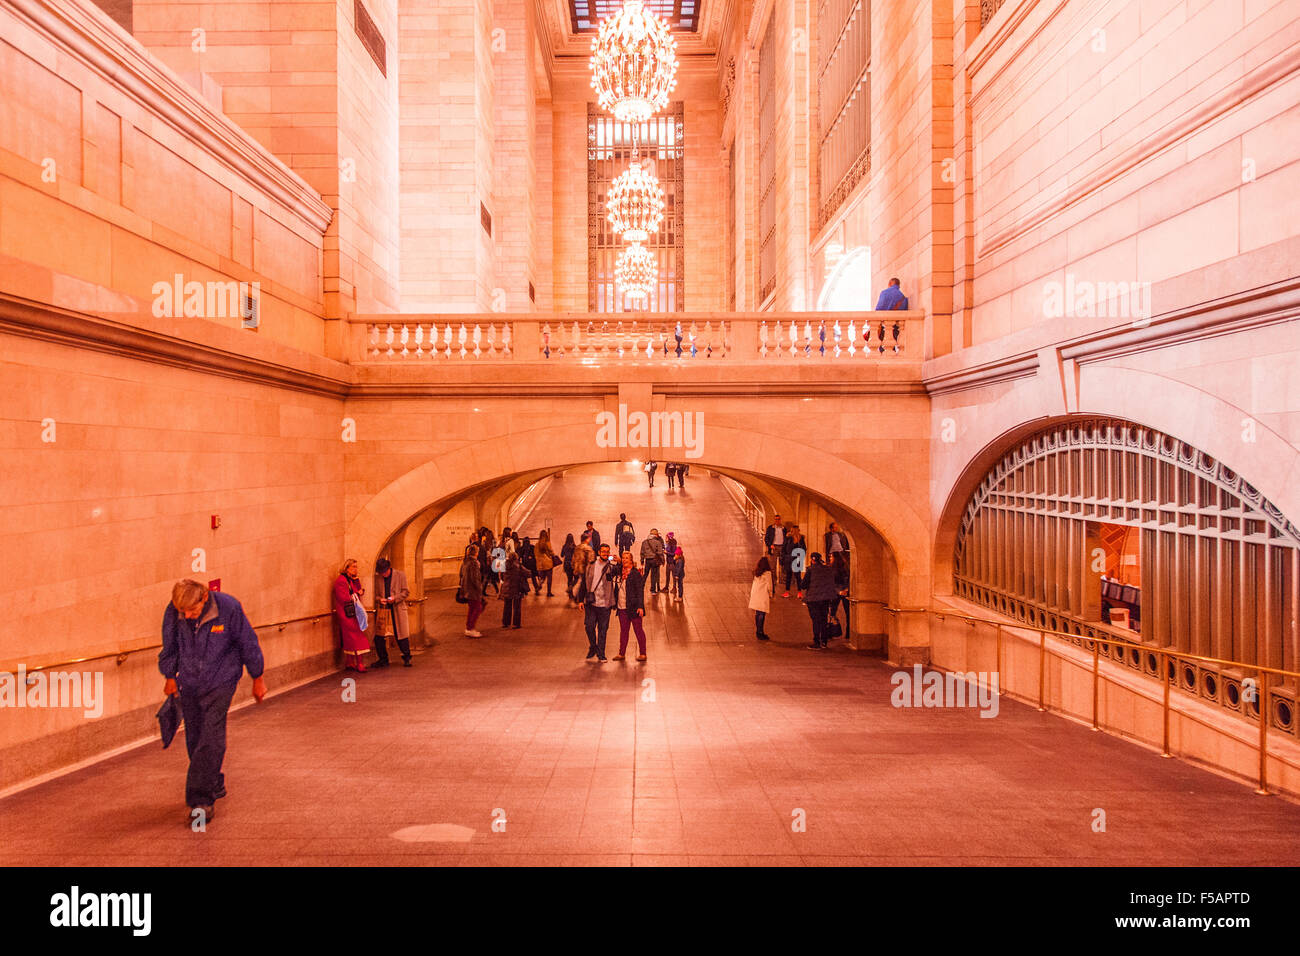 Whispering gallery in Grand Central terminal Station. Manhattan, New York City, United States of America. Stock Photo